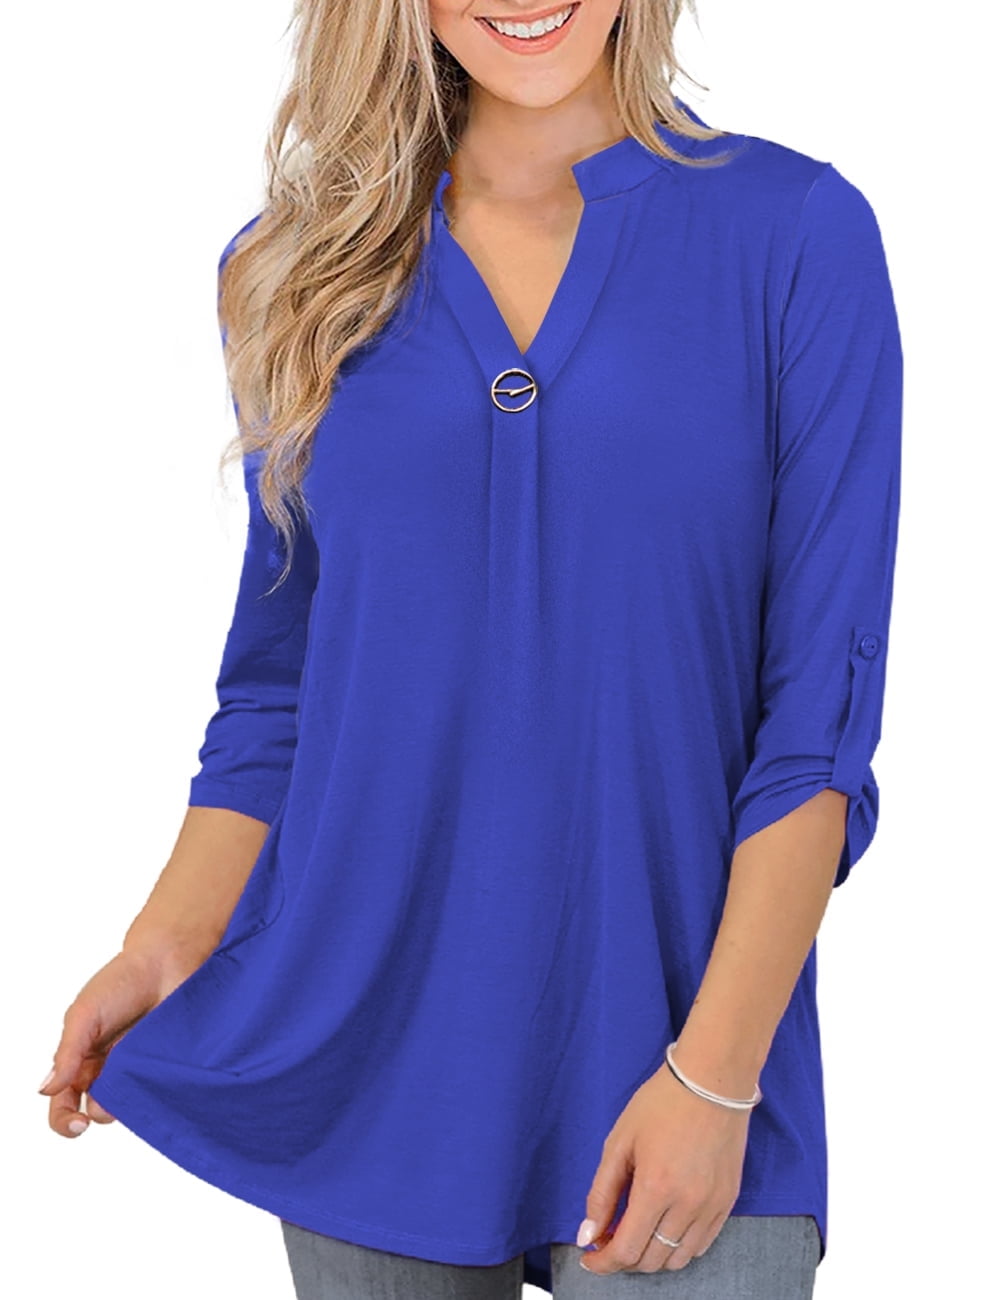 CPOKRTWSO Women's Clothes Plus Size Tunic Tops 3/4 Length Sleeve Shirts ...